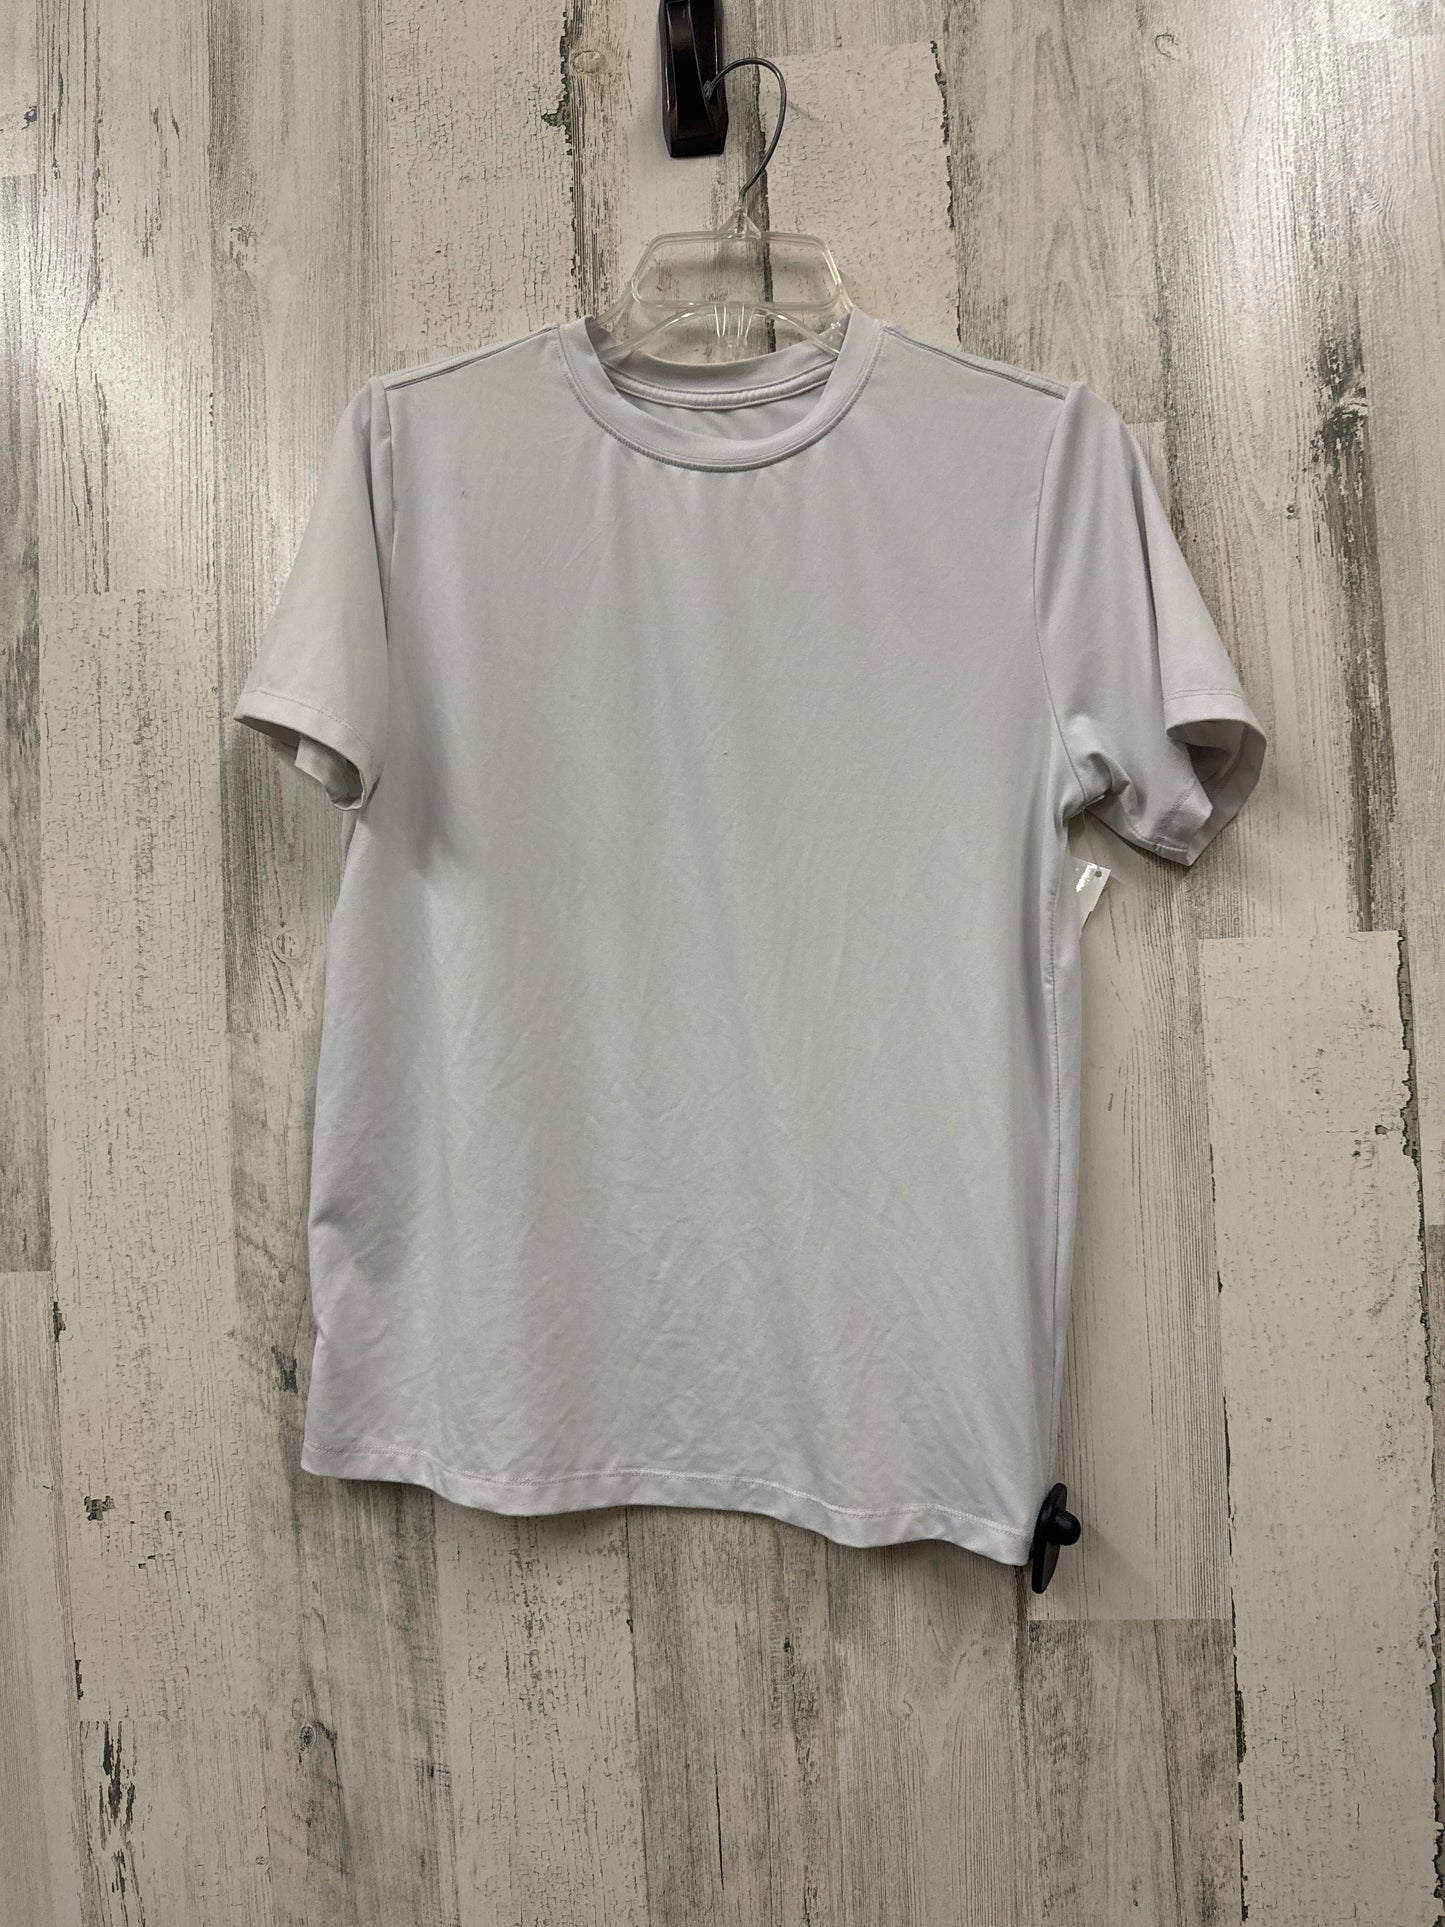 White Athletic Top Short Sleeve Fabletics, Size Xs